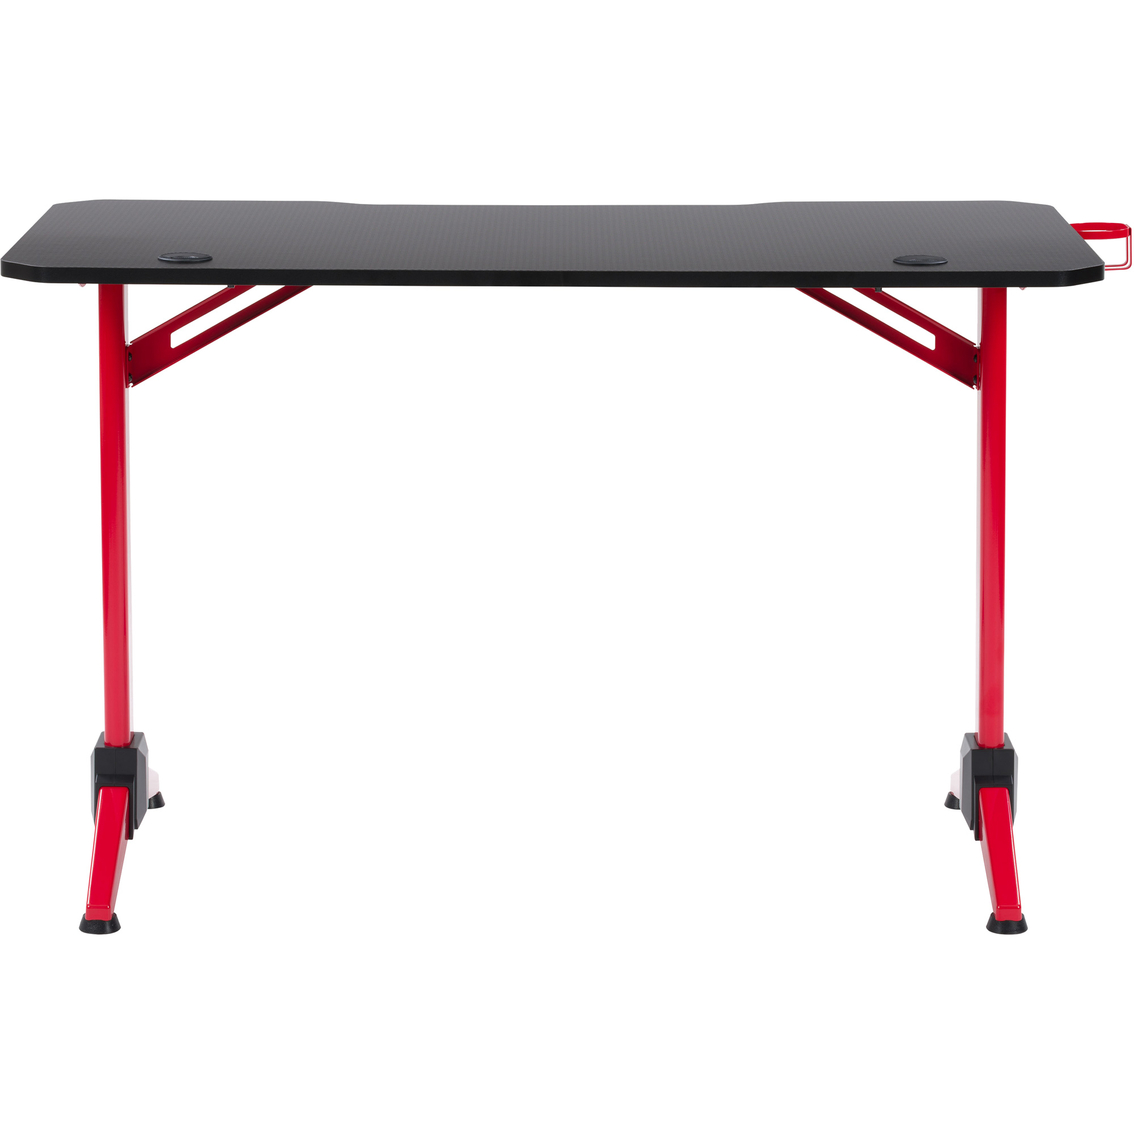 CorLiving Conqueror Black and Red Gaming Desk with LED Lights - Image 2 of 10